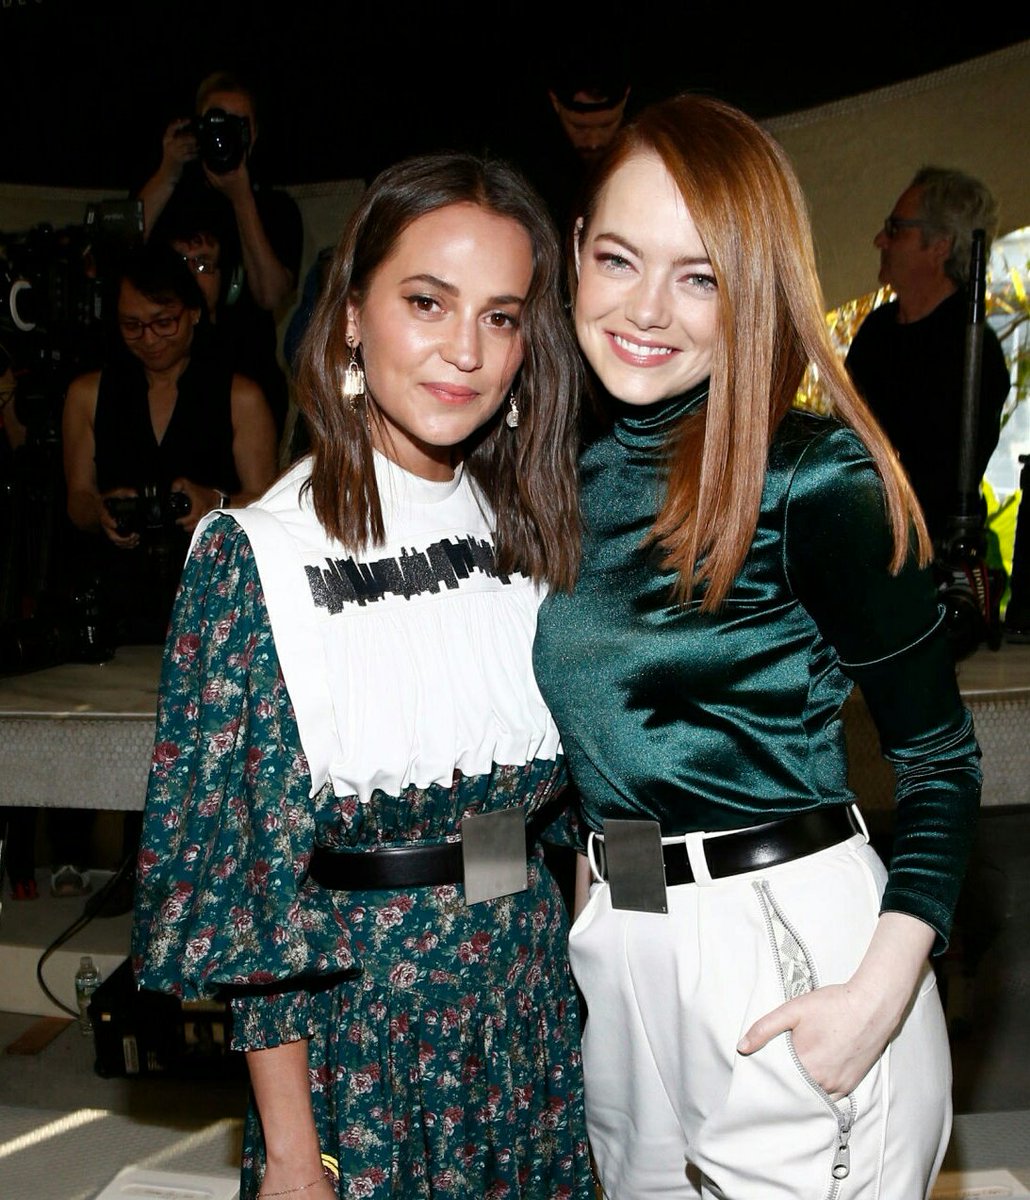 best of emma stone on X: Emma with Alicia Vikander, Michelle